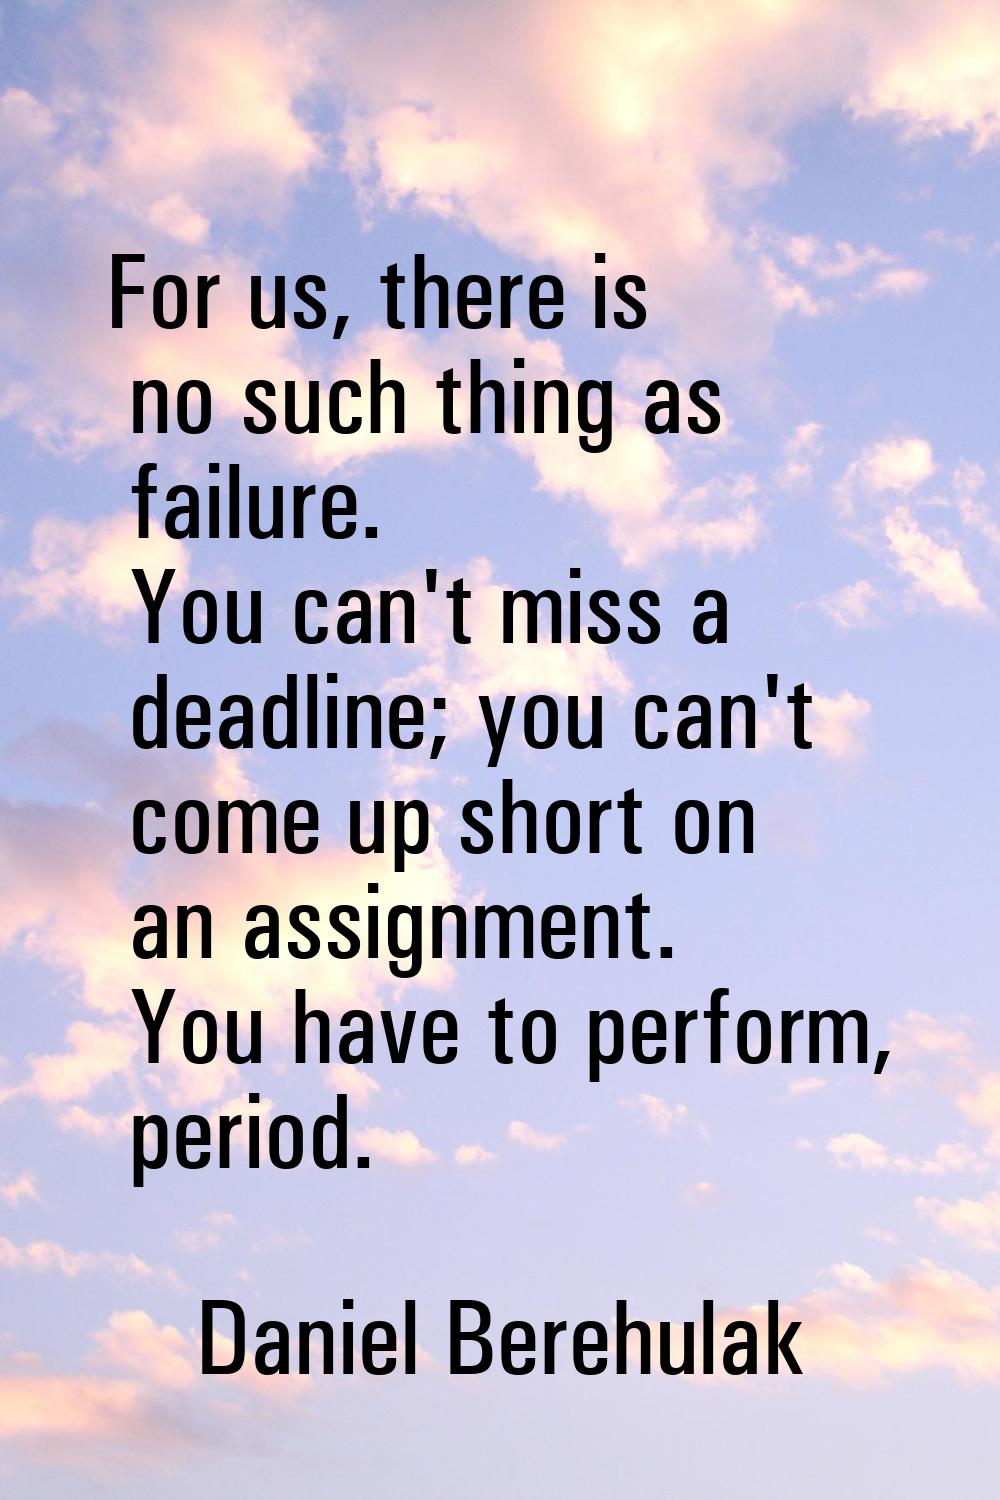 For us, there is no such thing as failure. You can't miss a deadline; you can't come up short on an